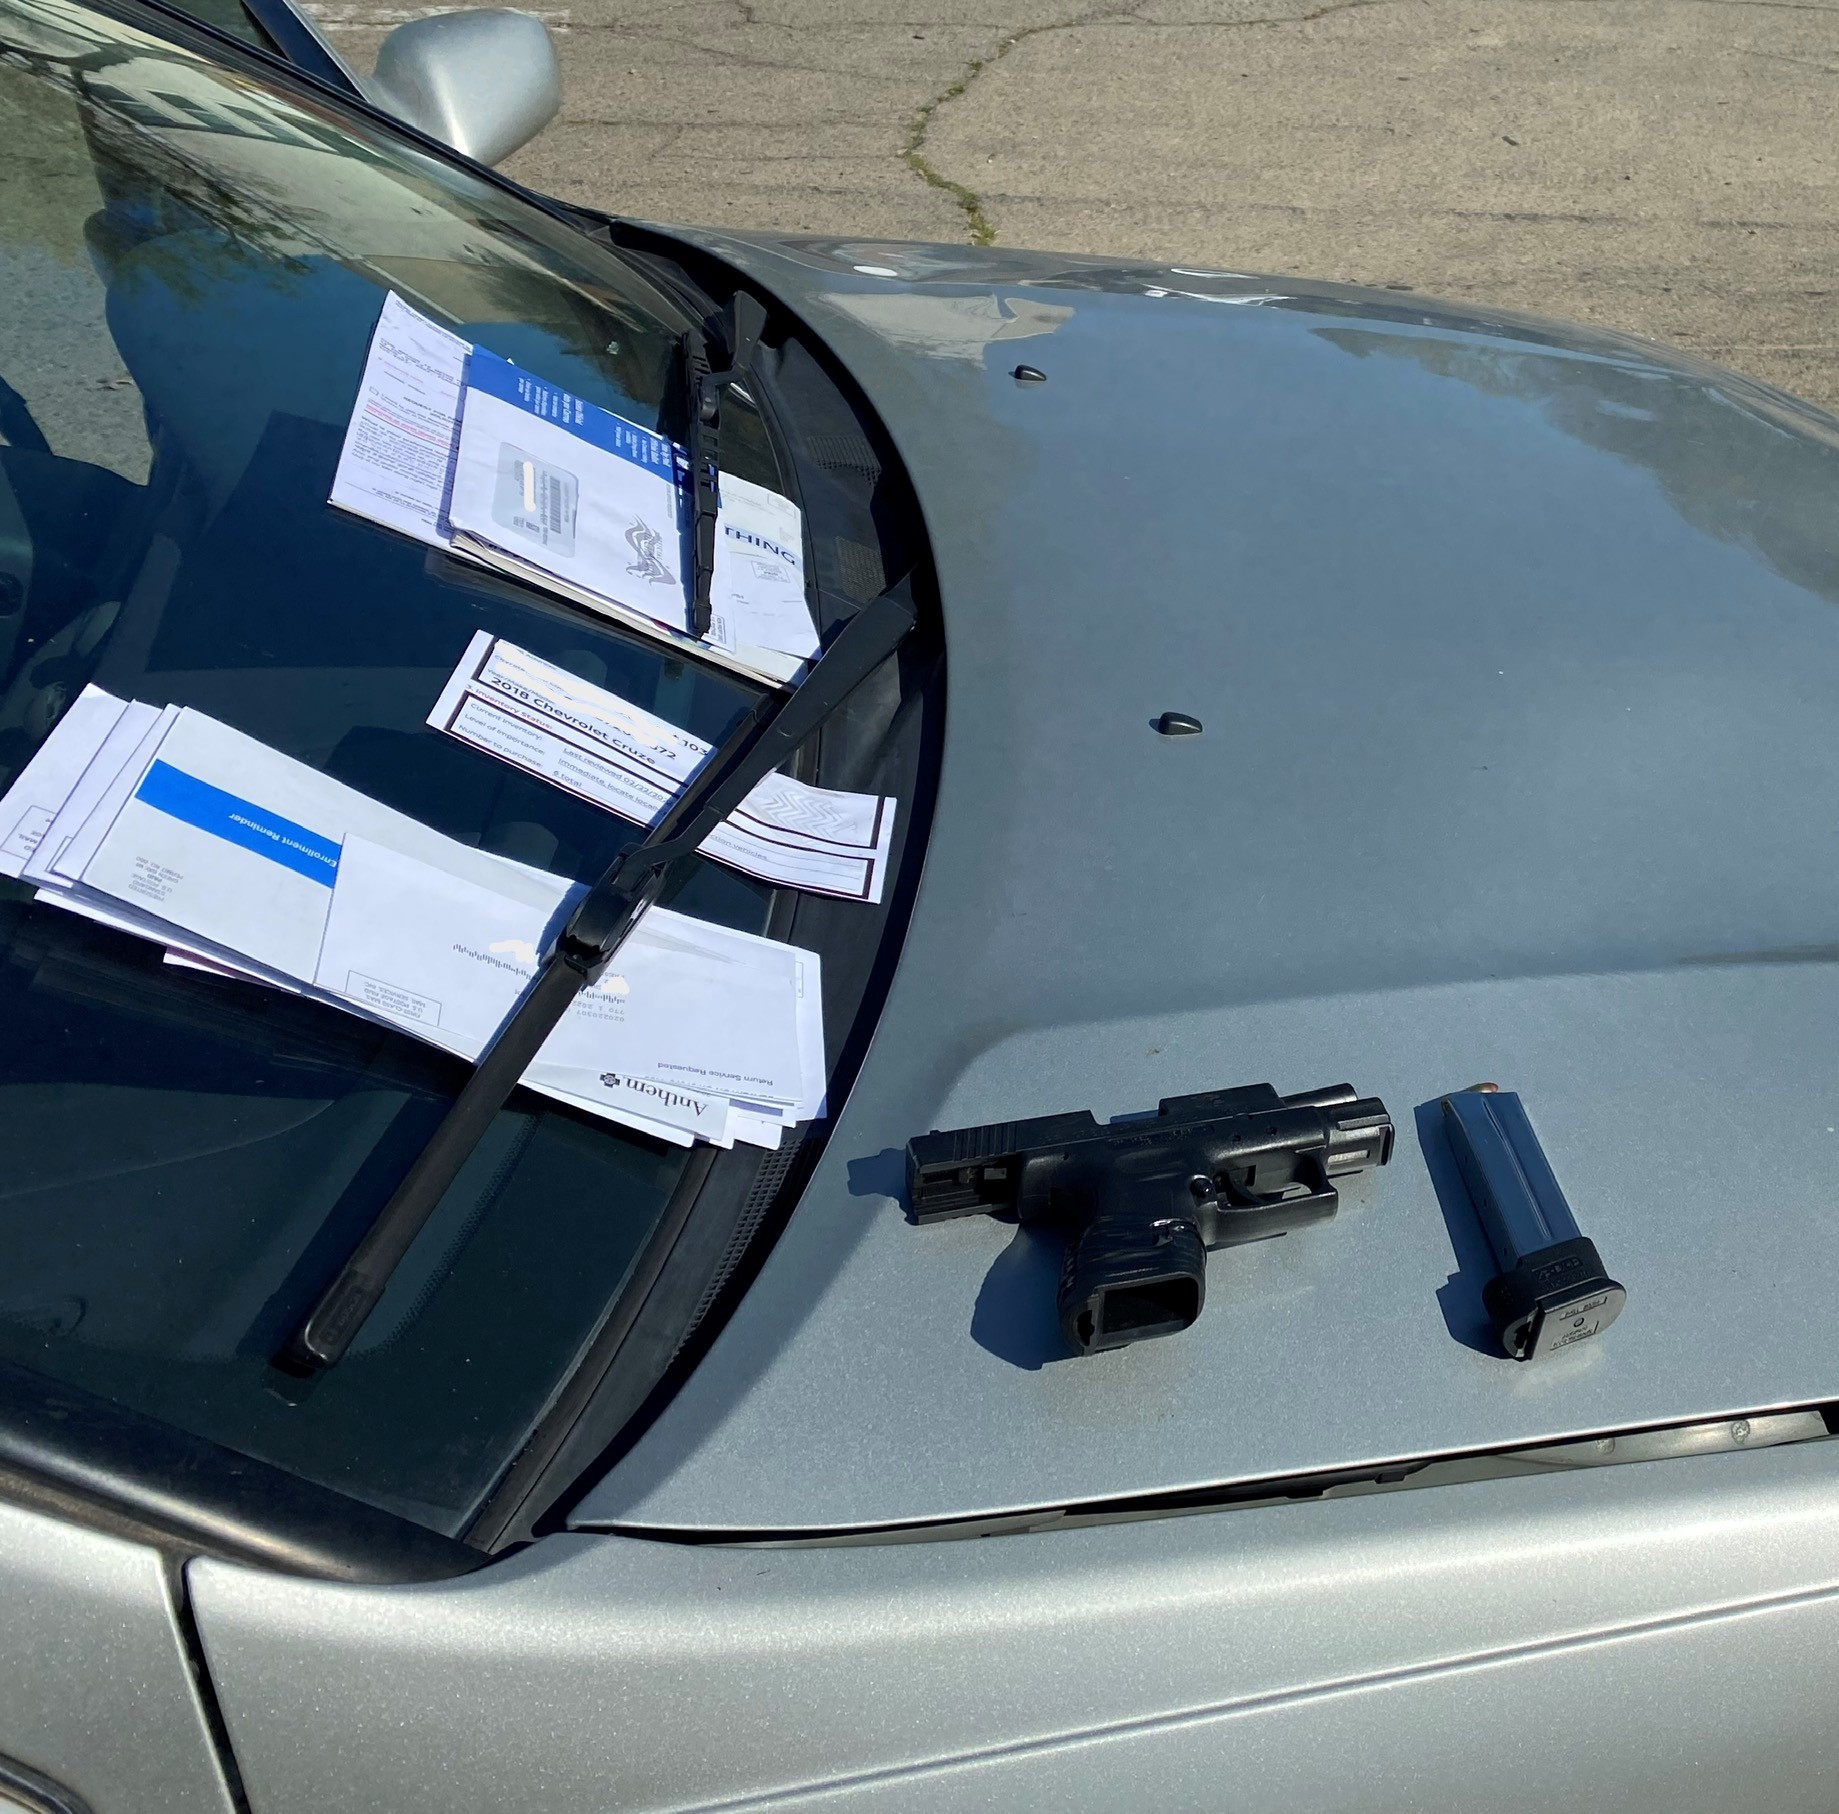 Suspects Arrested in a Stolen Car with a Loaded Stolen Gun and Mail